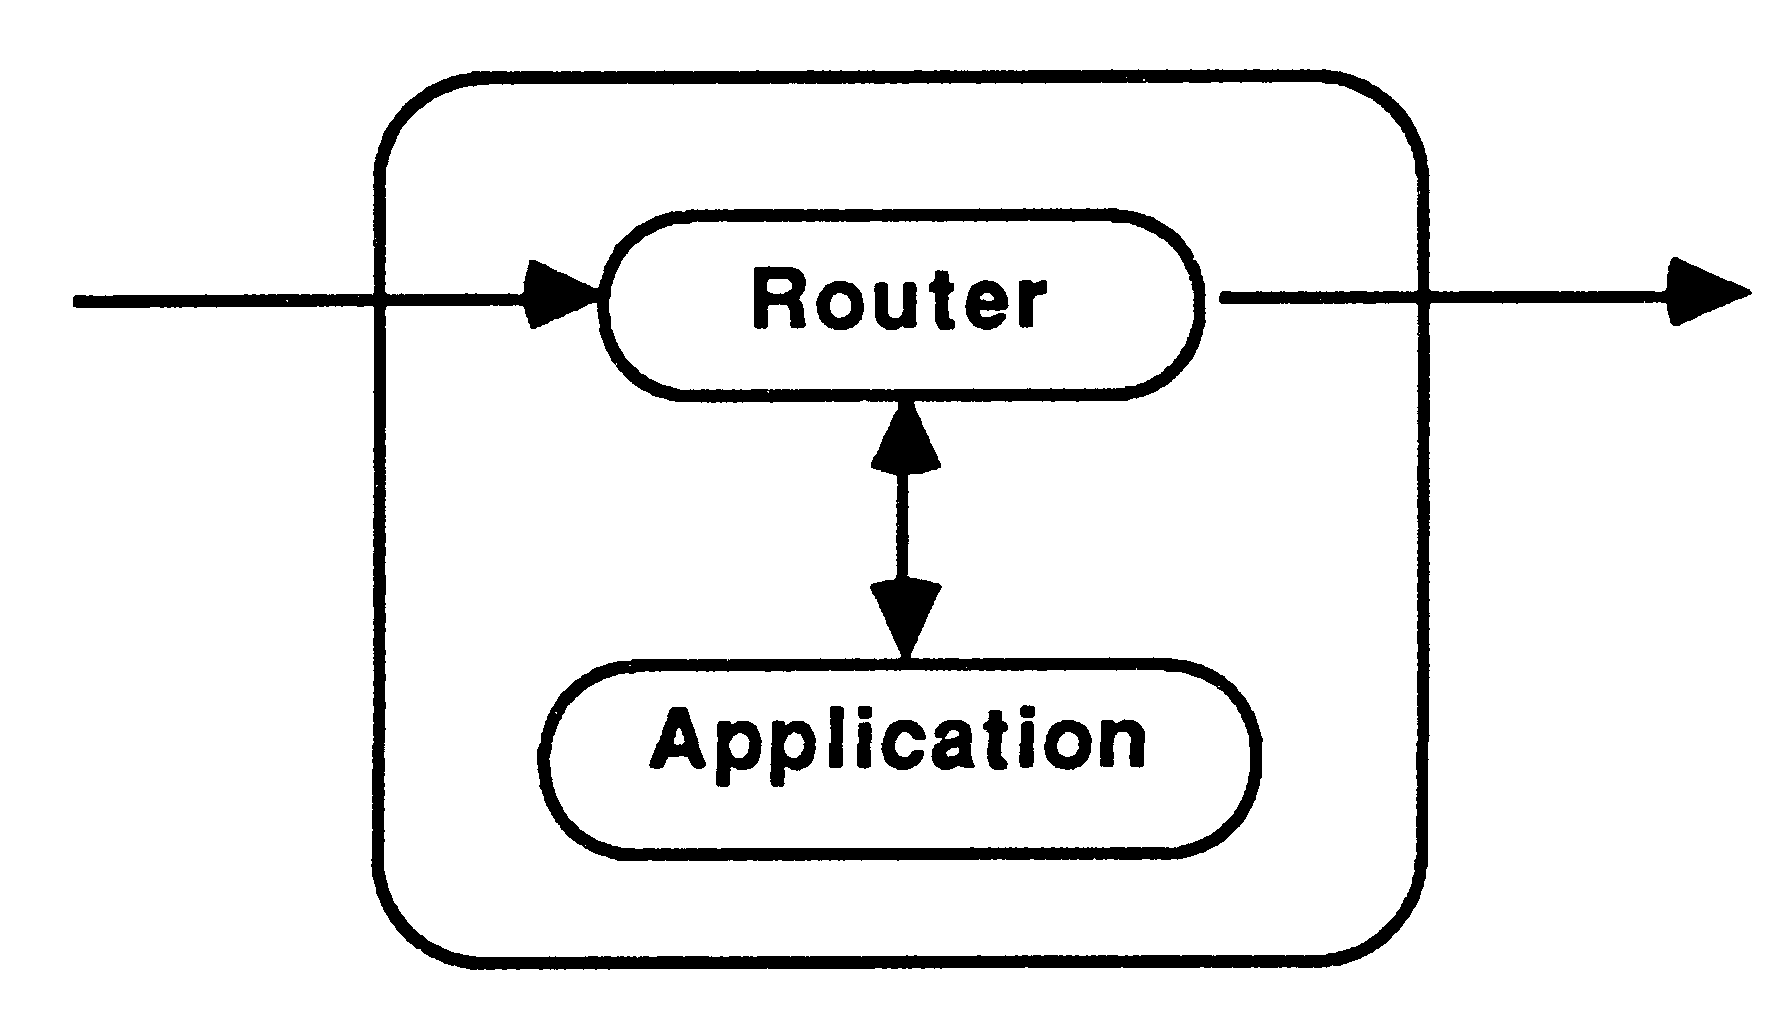 Pipe node with one router